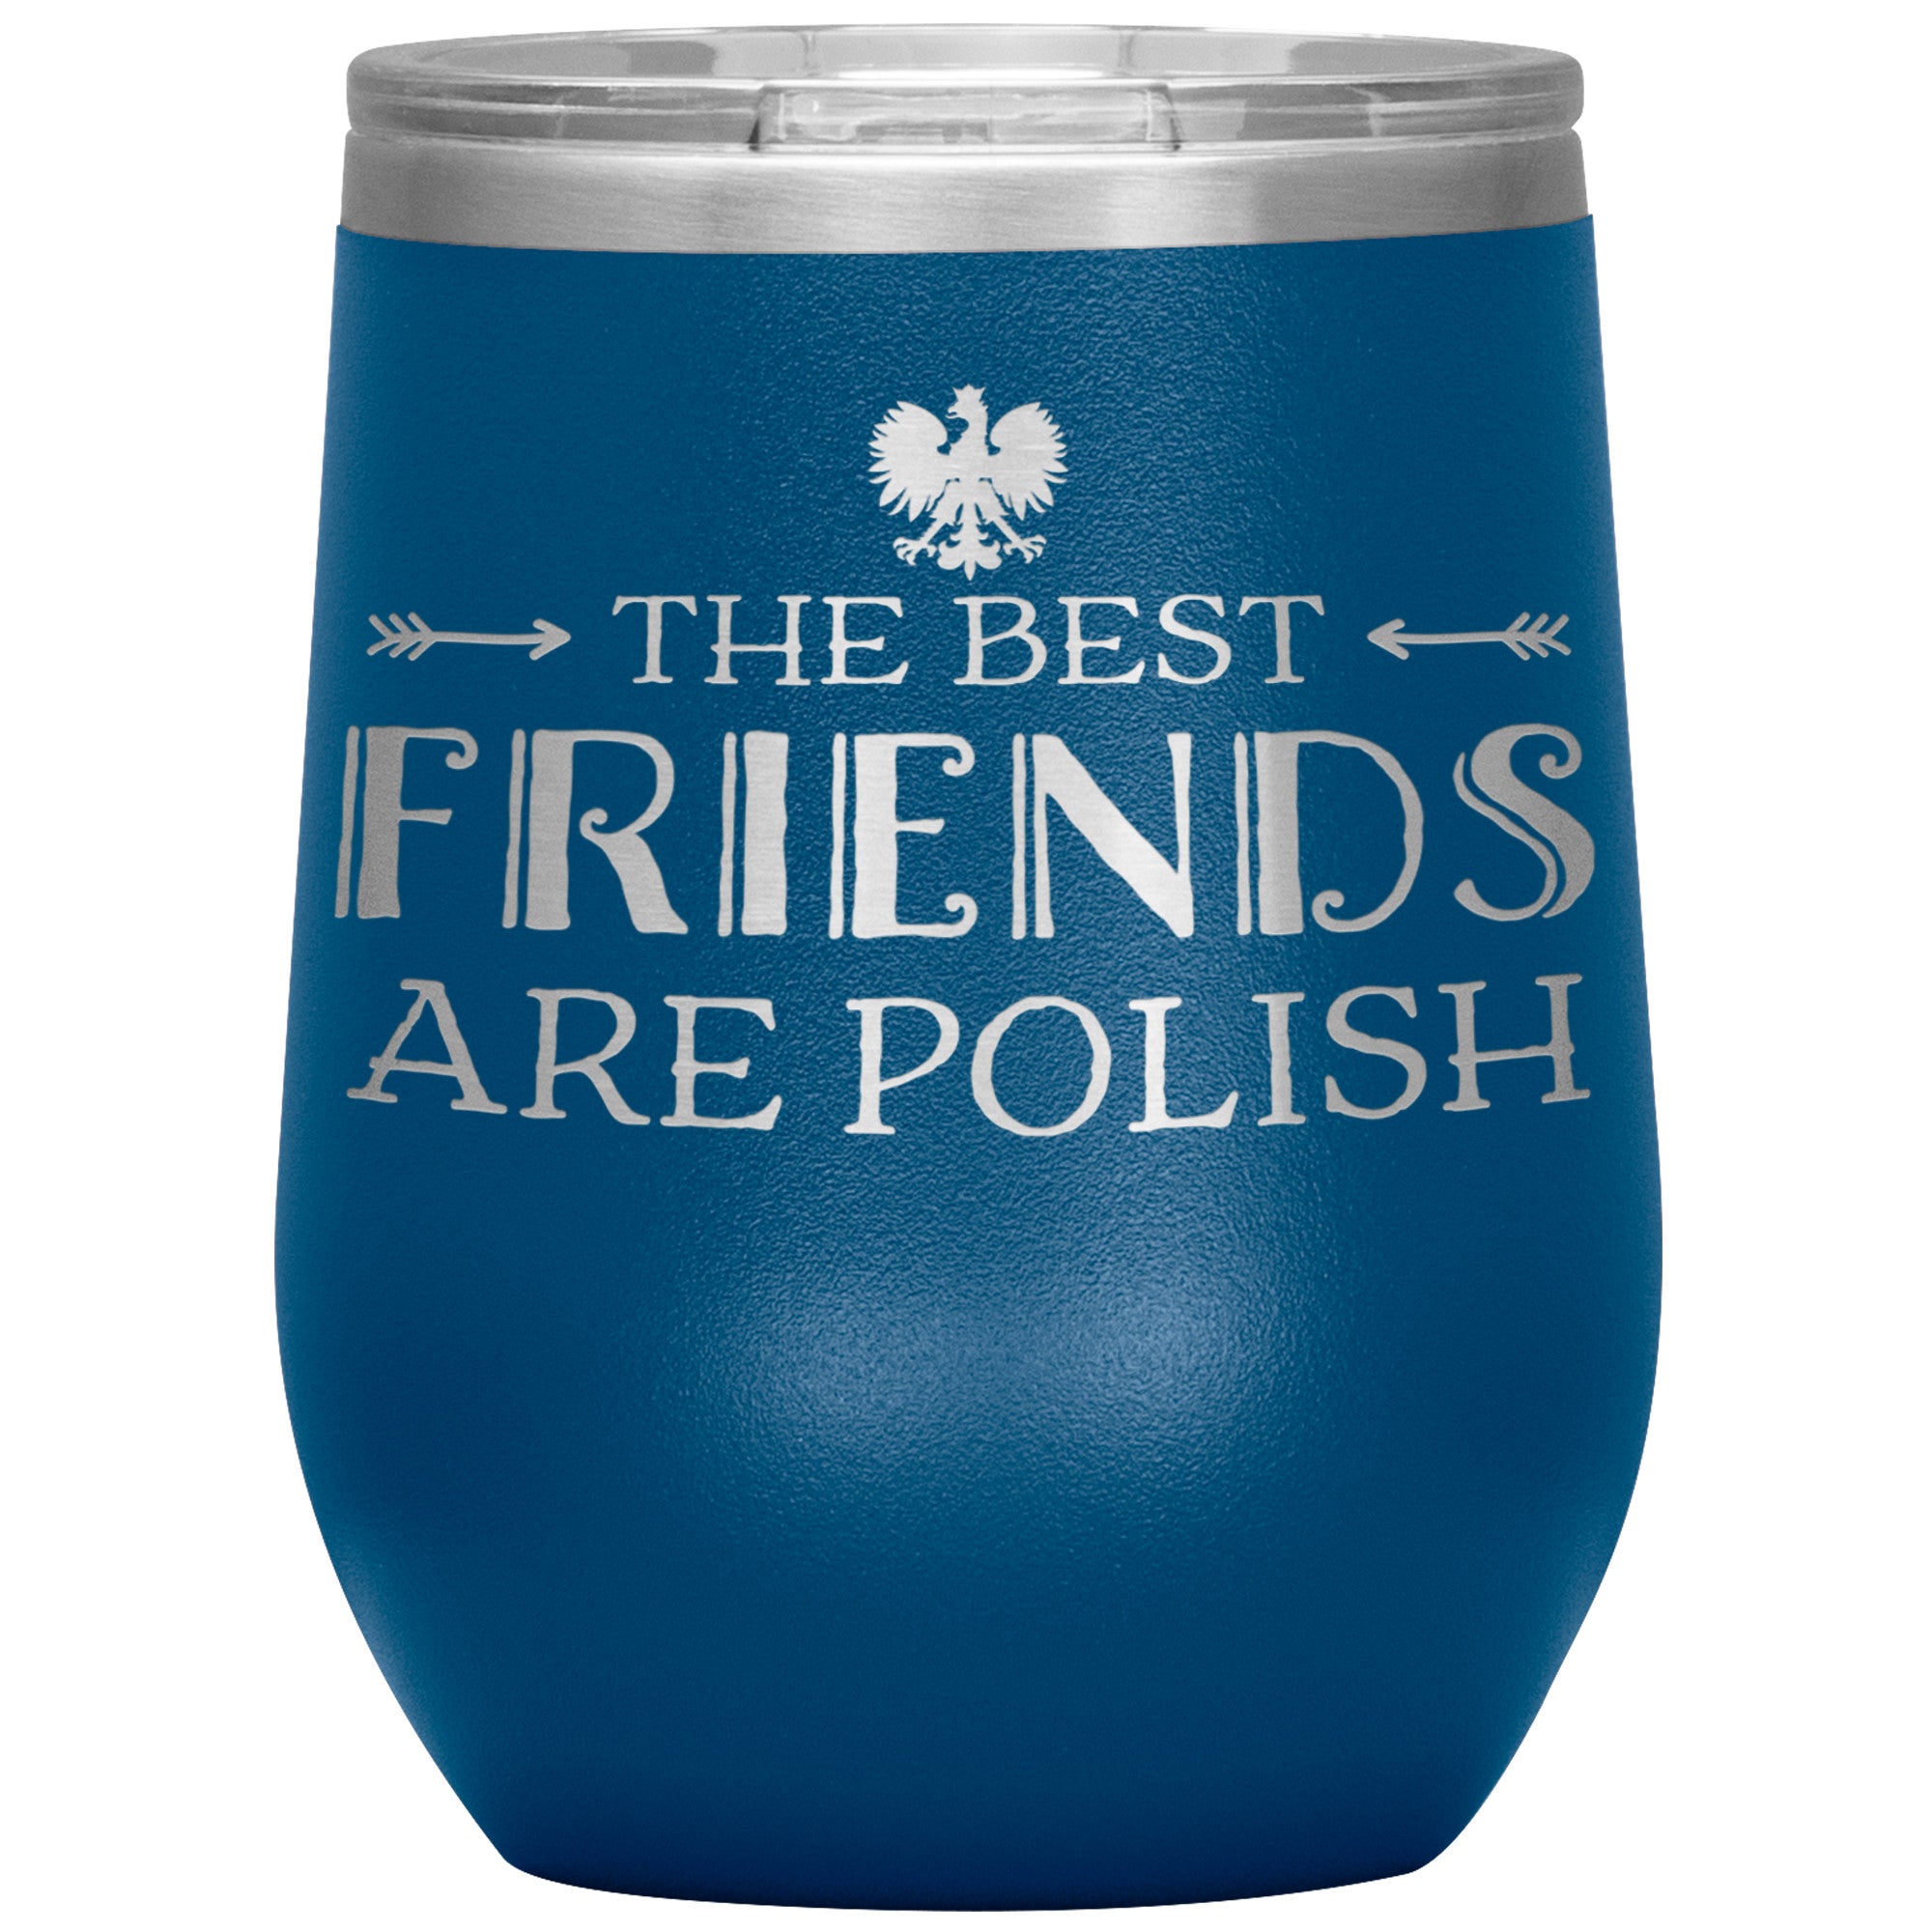 The Best Friends Are Polish Insulated Wine Tumbler Tumblers teelaunch Blue  